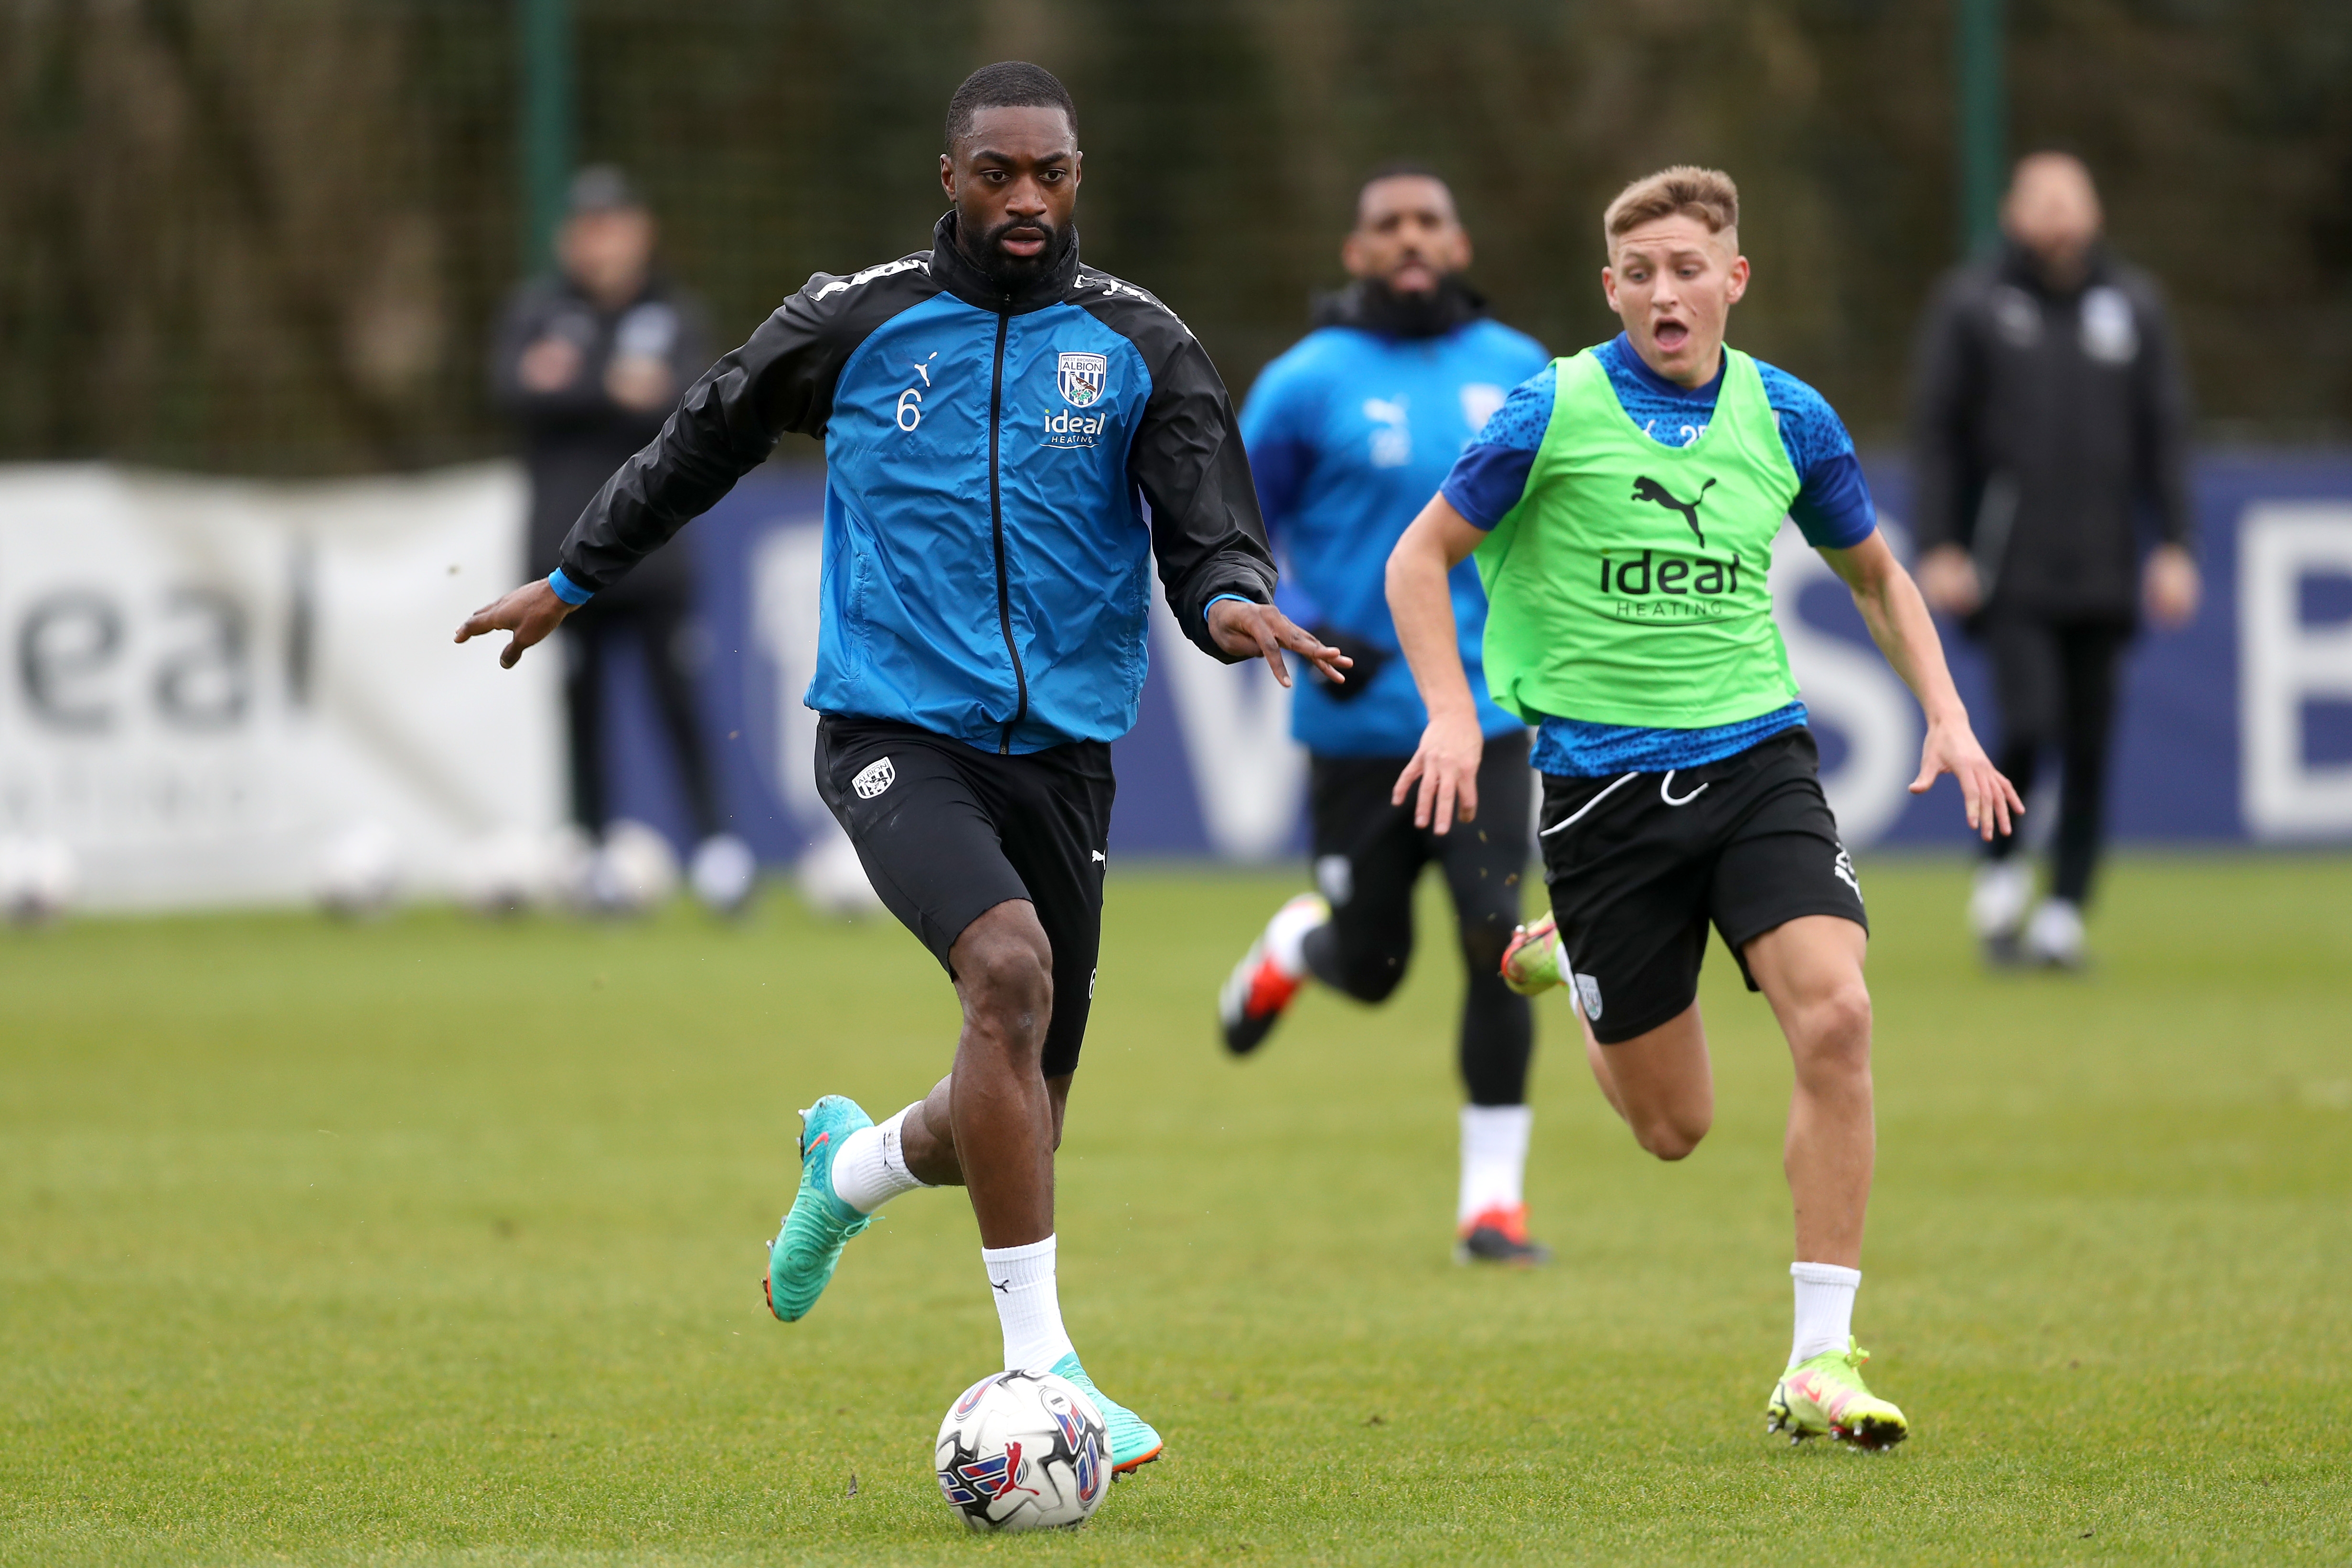 Semi Ajayi running with the ball during a training session